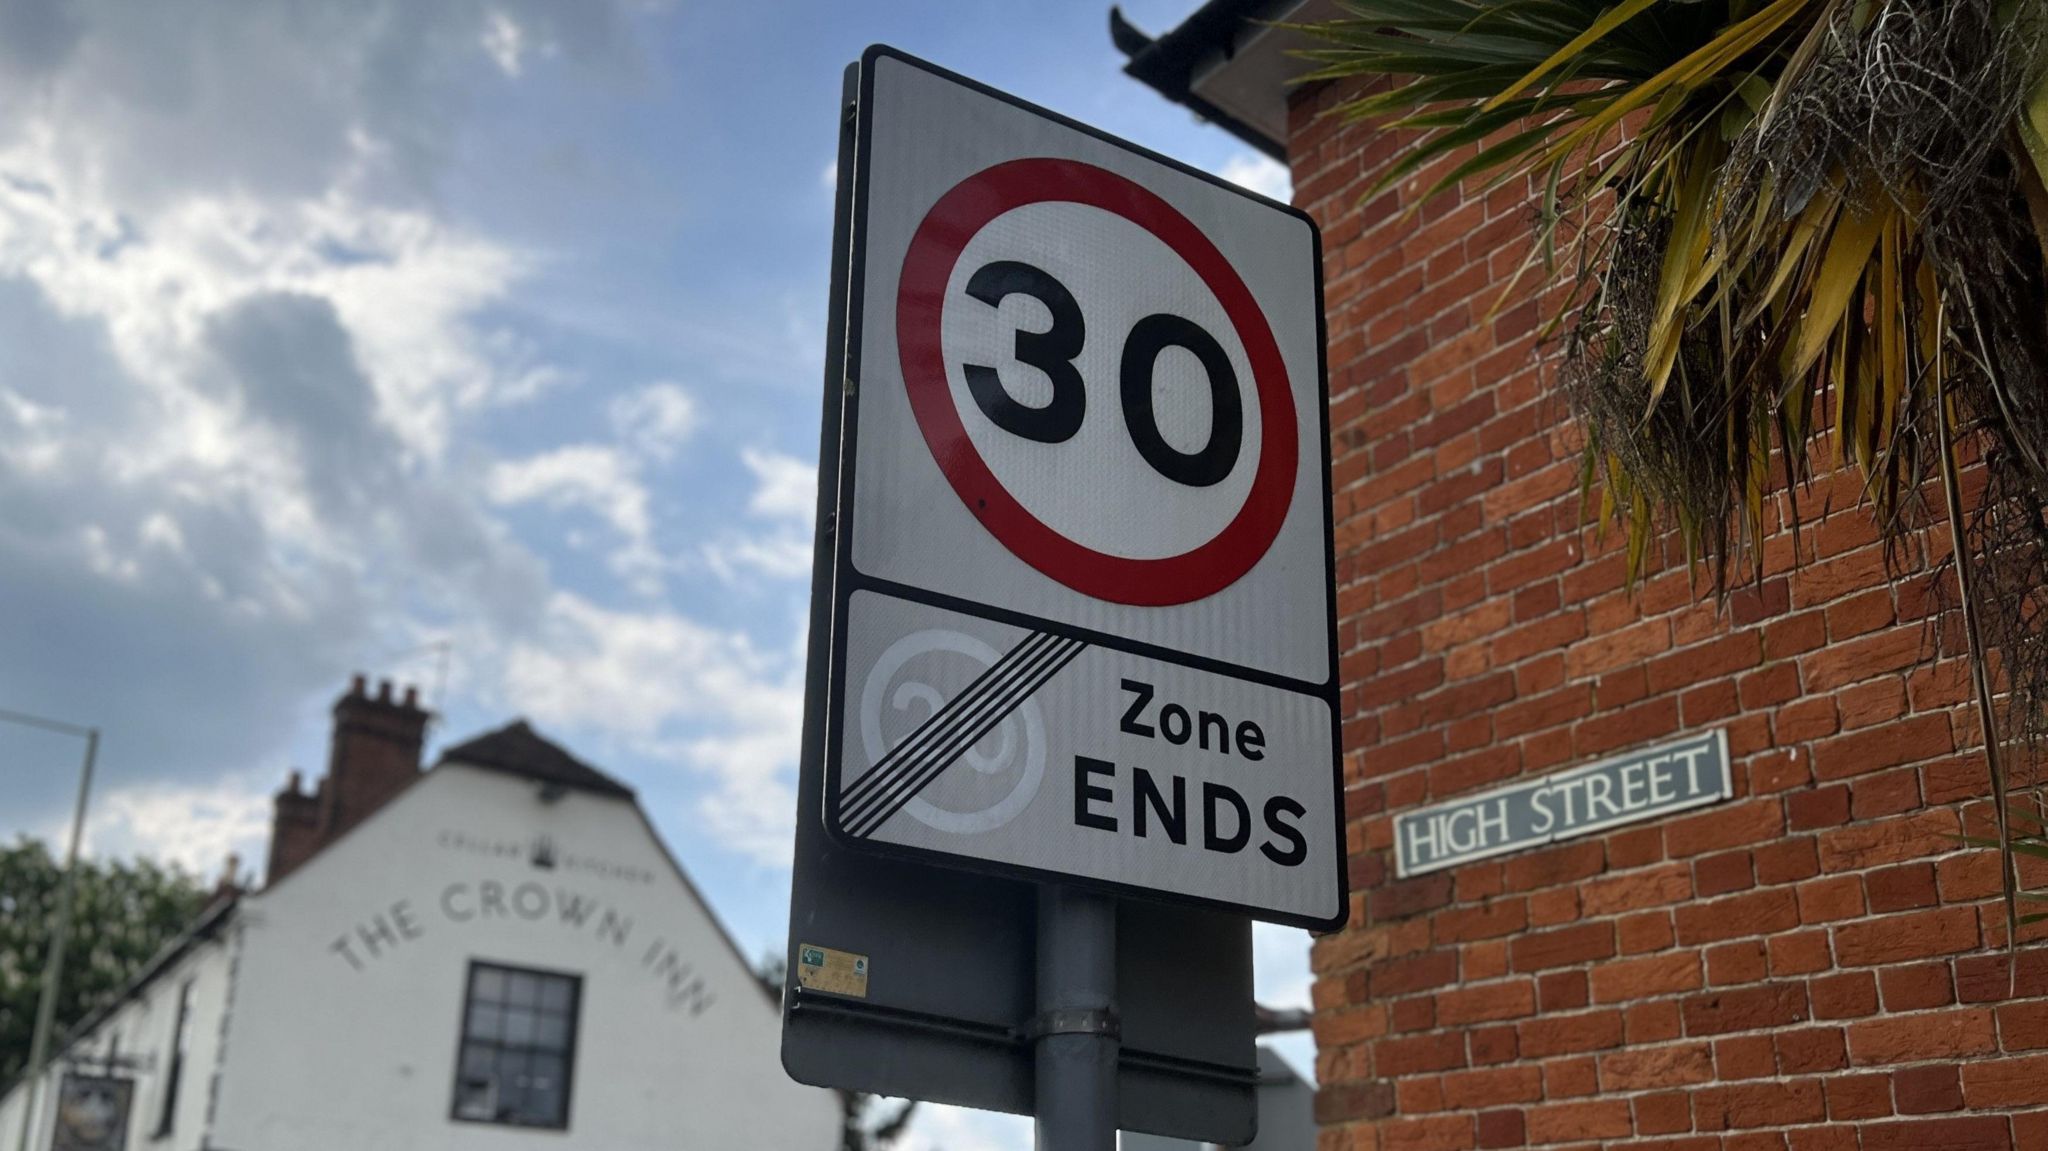 30mph sign in Theale